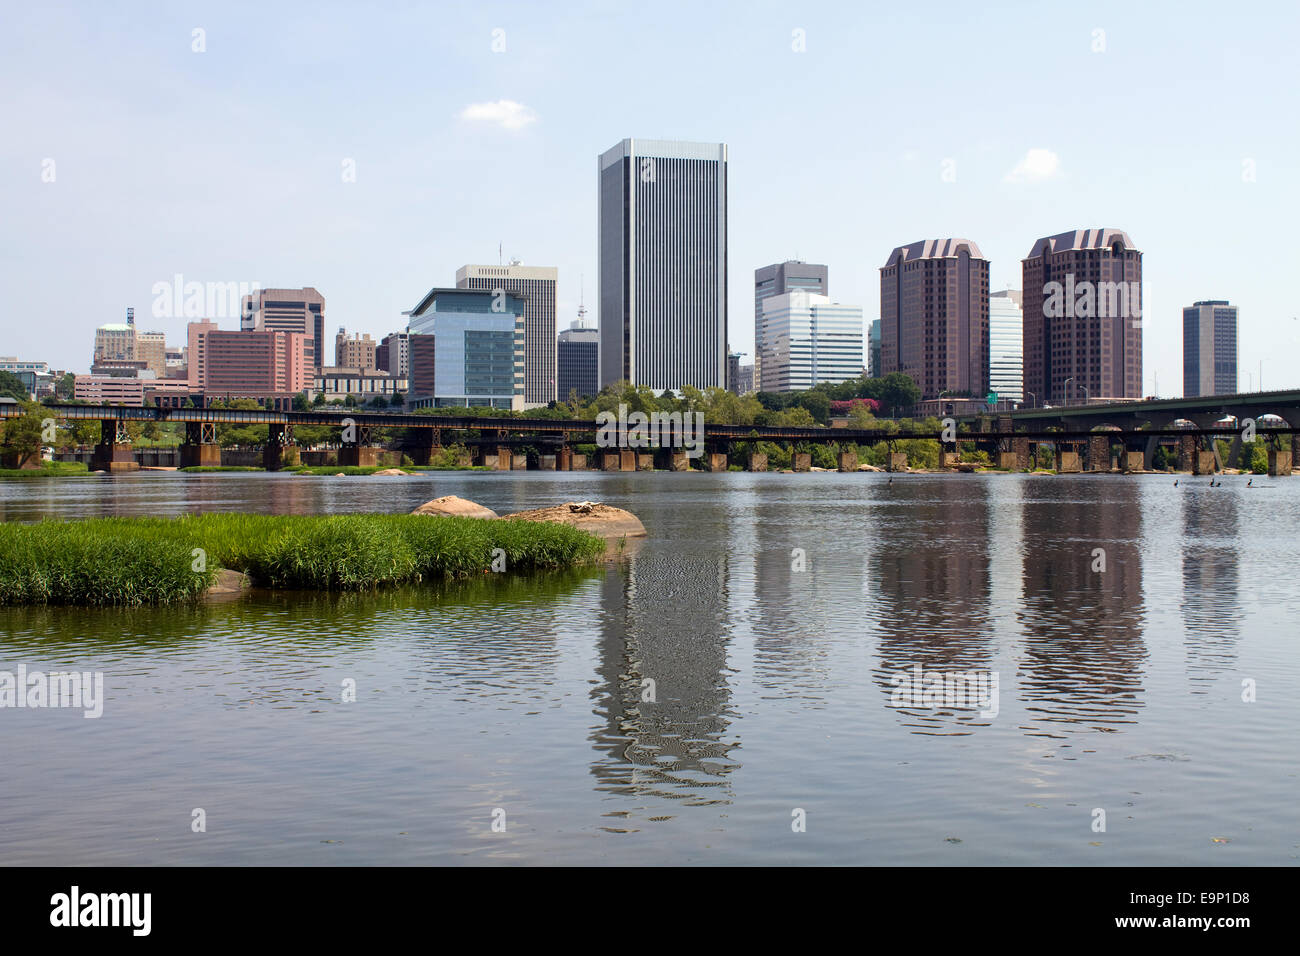 A skyline view of Richmond, Virginia, USA, the state capital, as seen from across the James River. Stock Photo